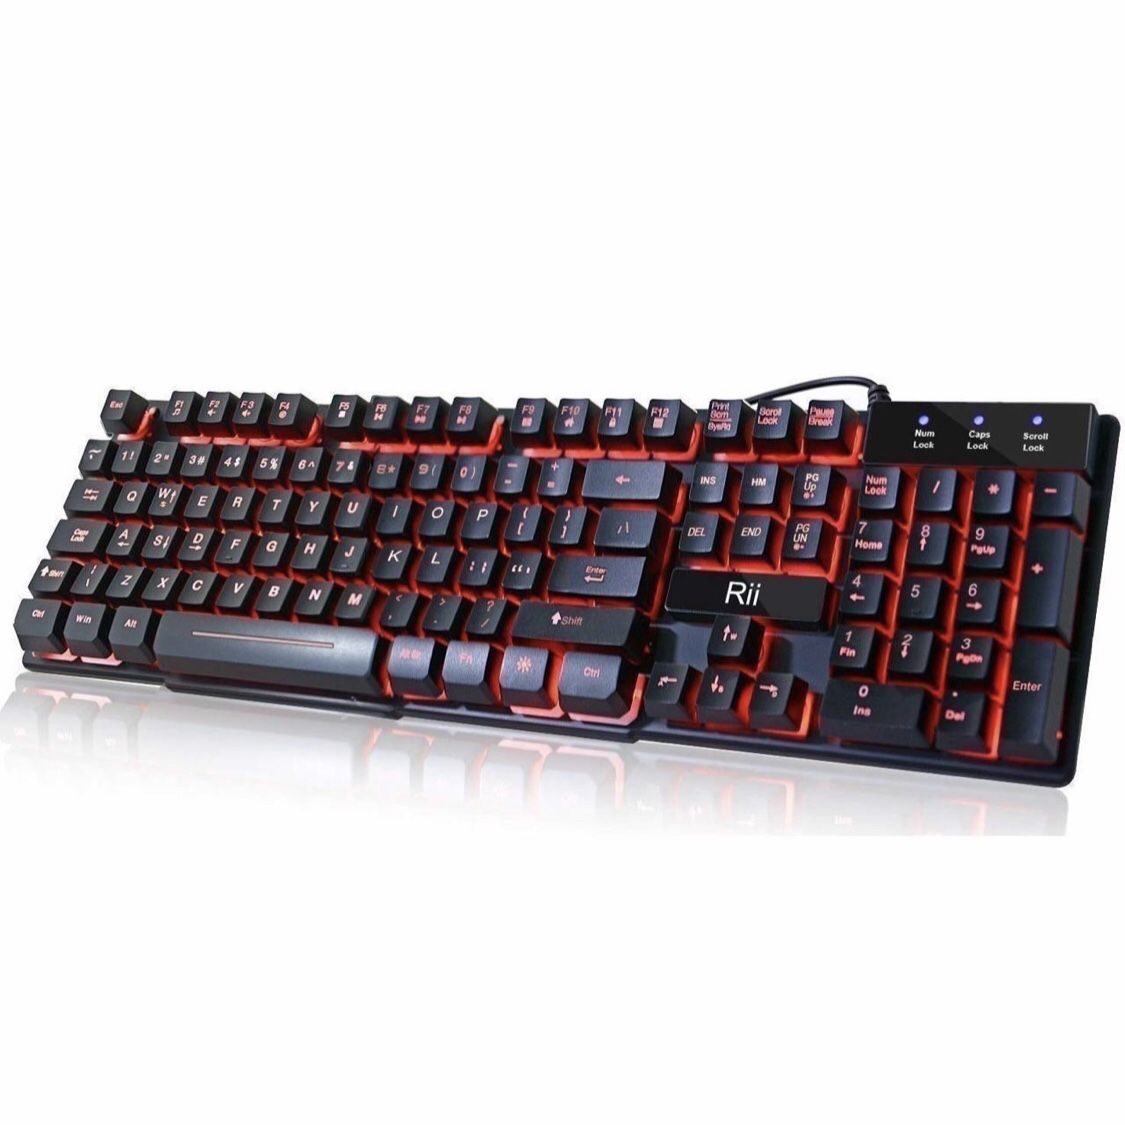 Wired multi color gaming keyboard